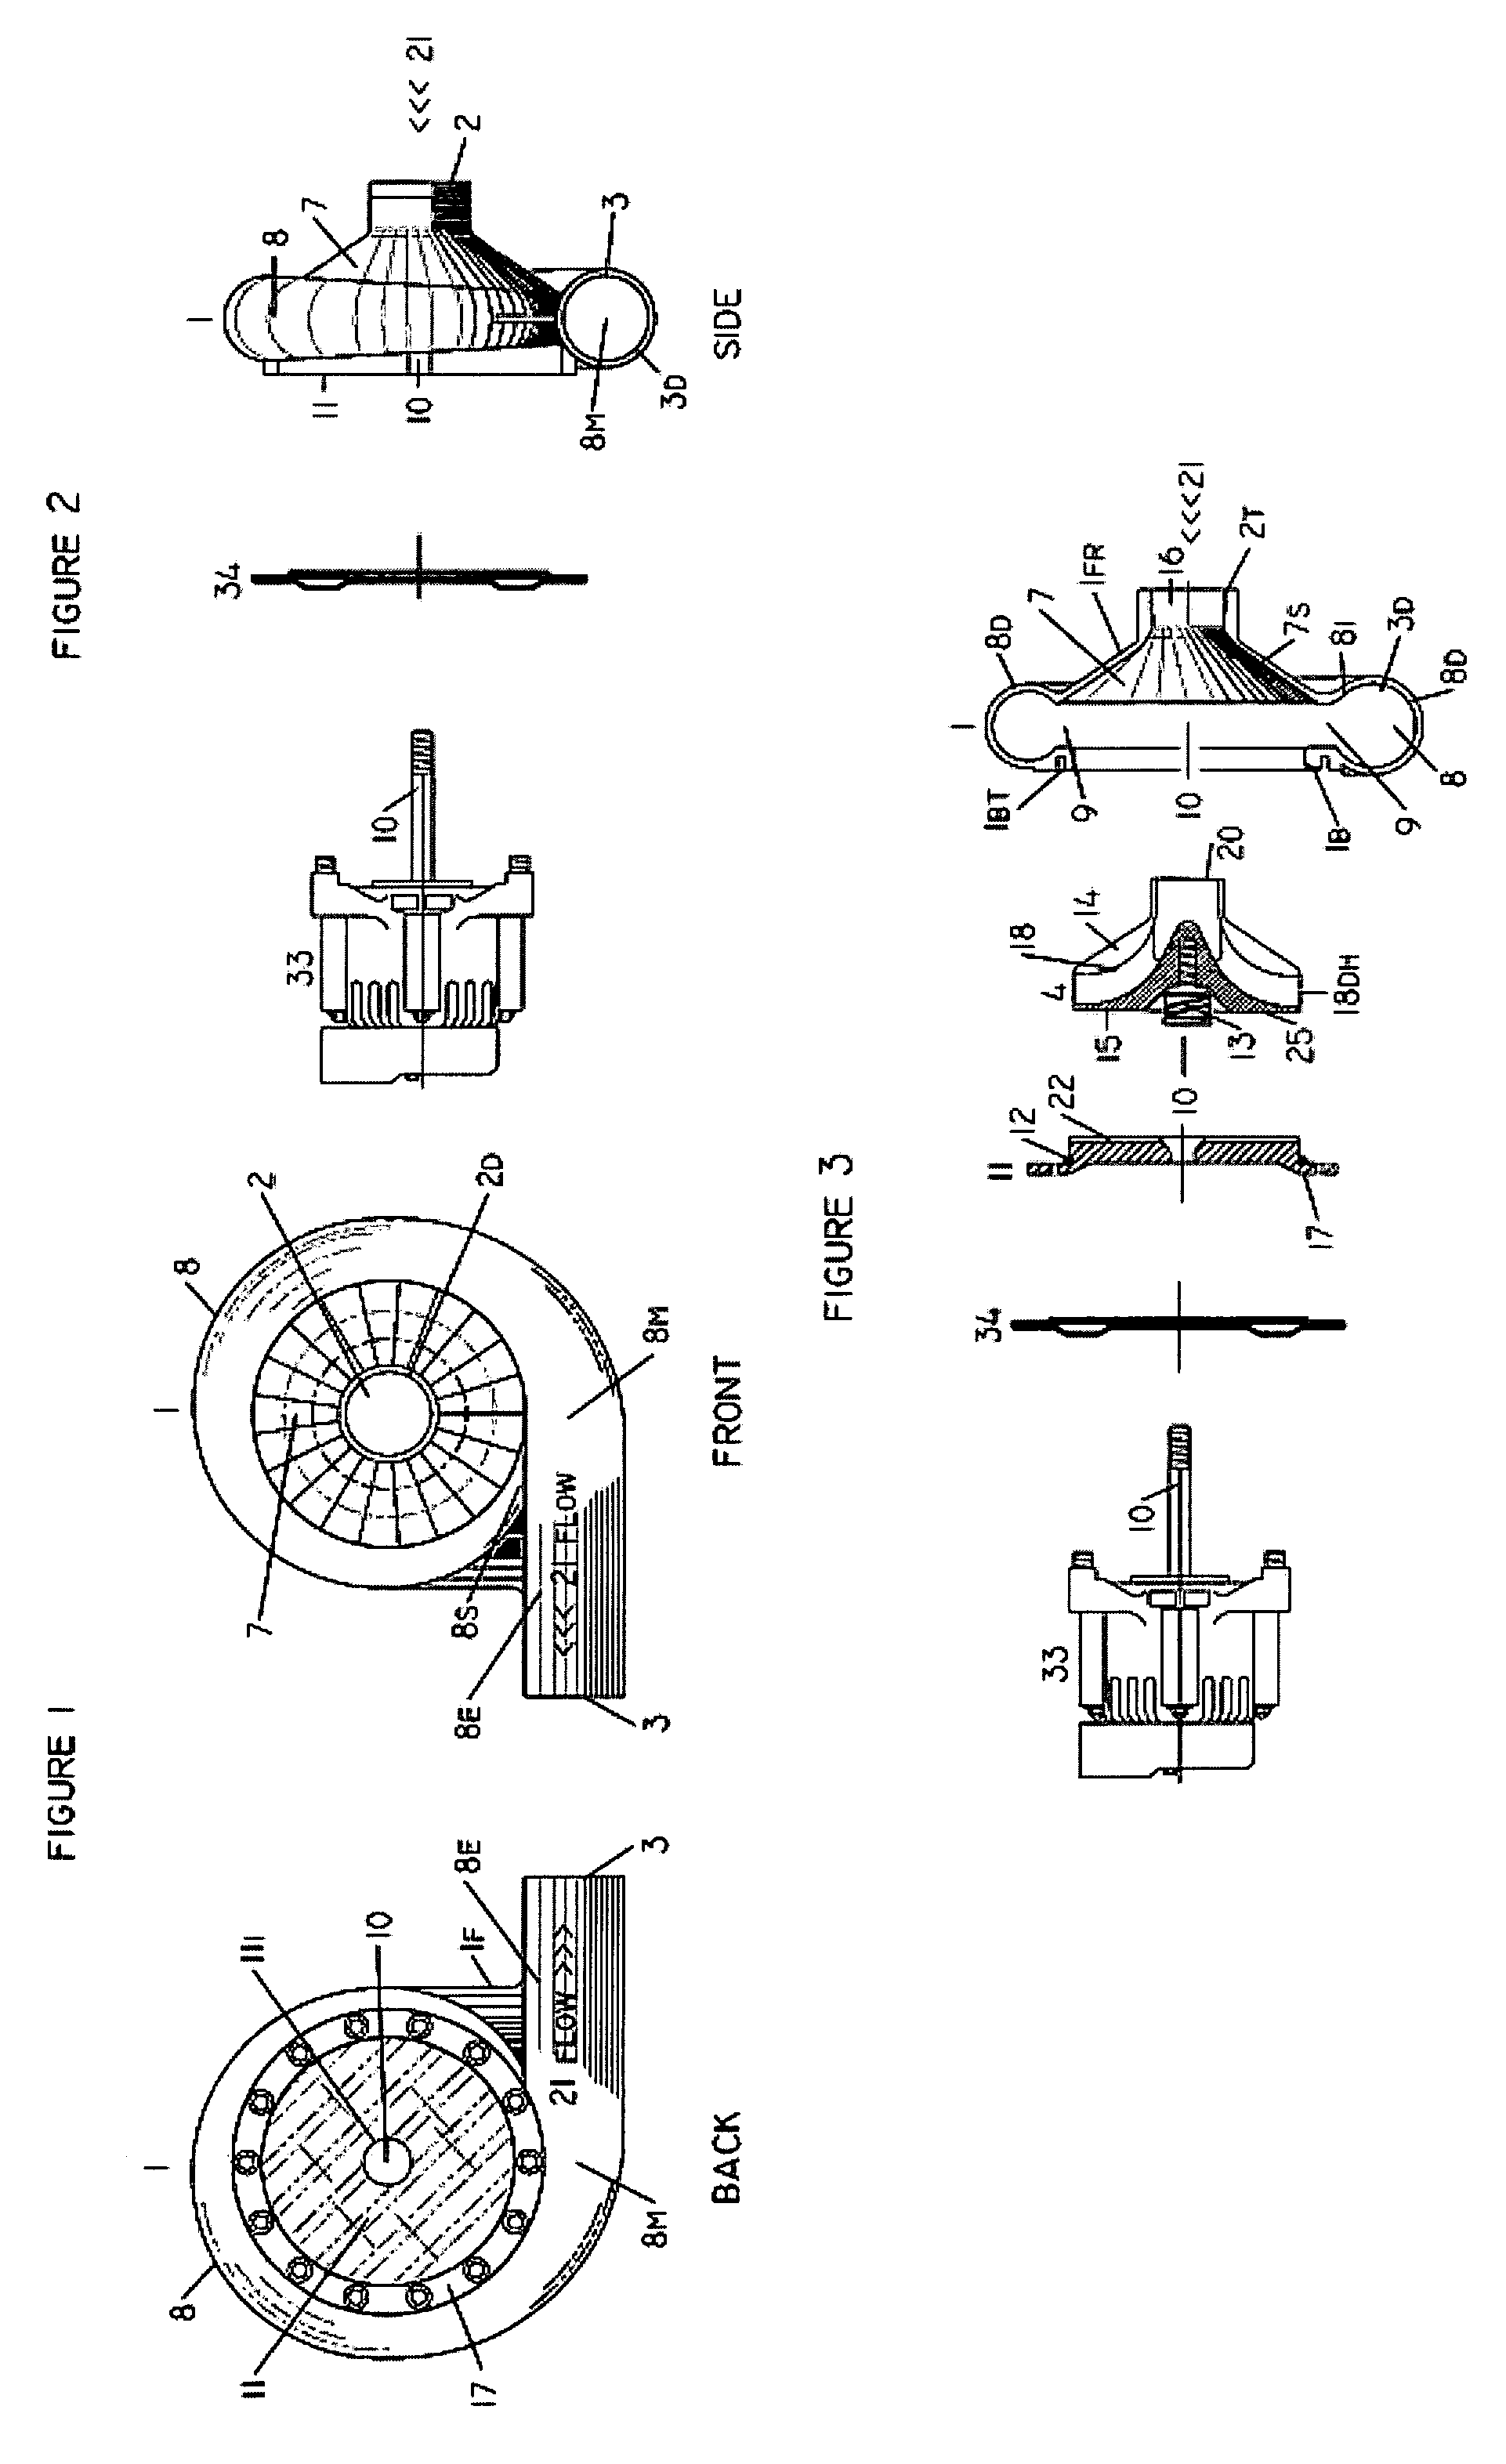 Reduced pressure differential hydroelectric turbine system